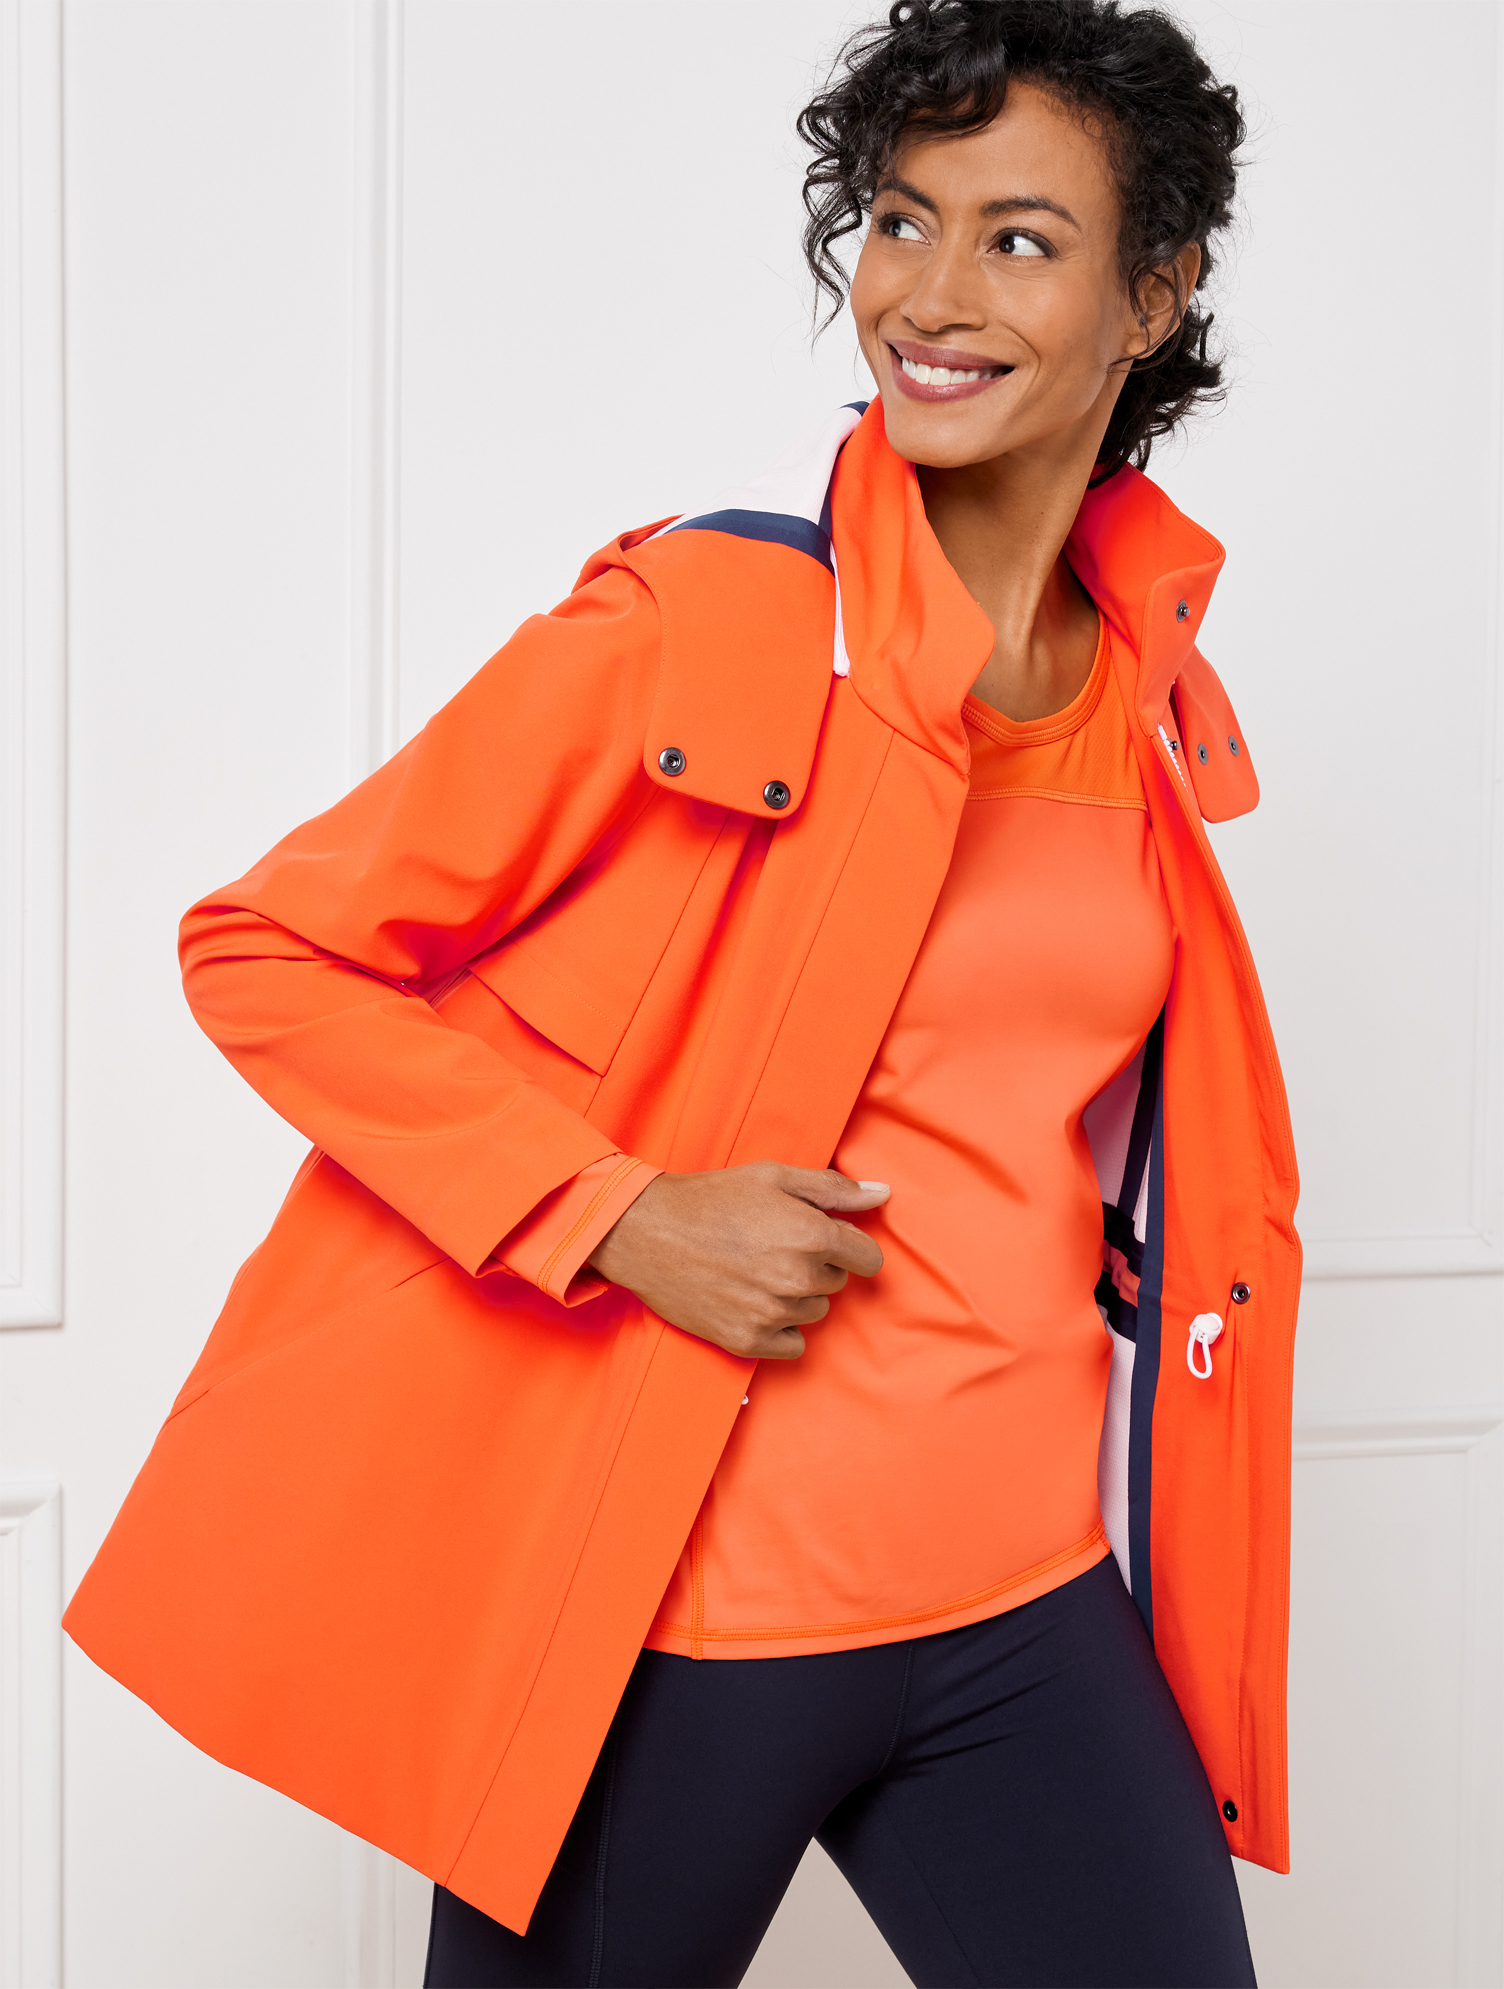 Talbots Hooded Water-resistant Jacket - Bright Tangerine/white - Xl  In Bright Tangerine,white